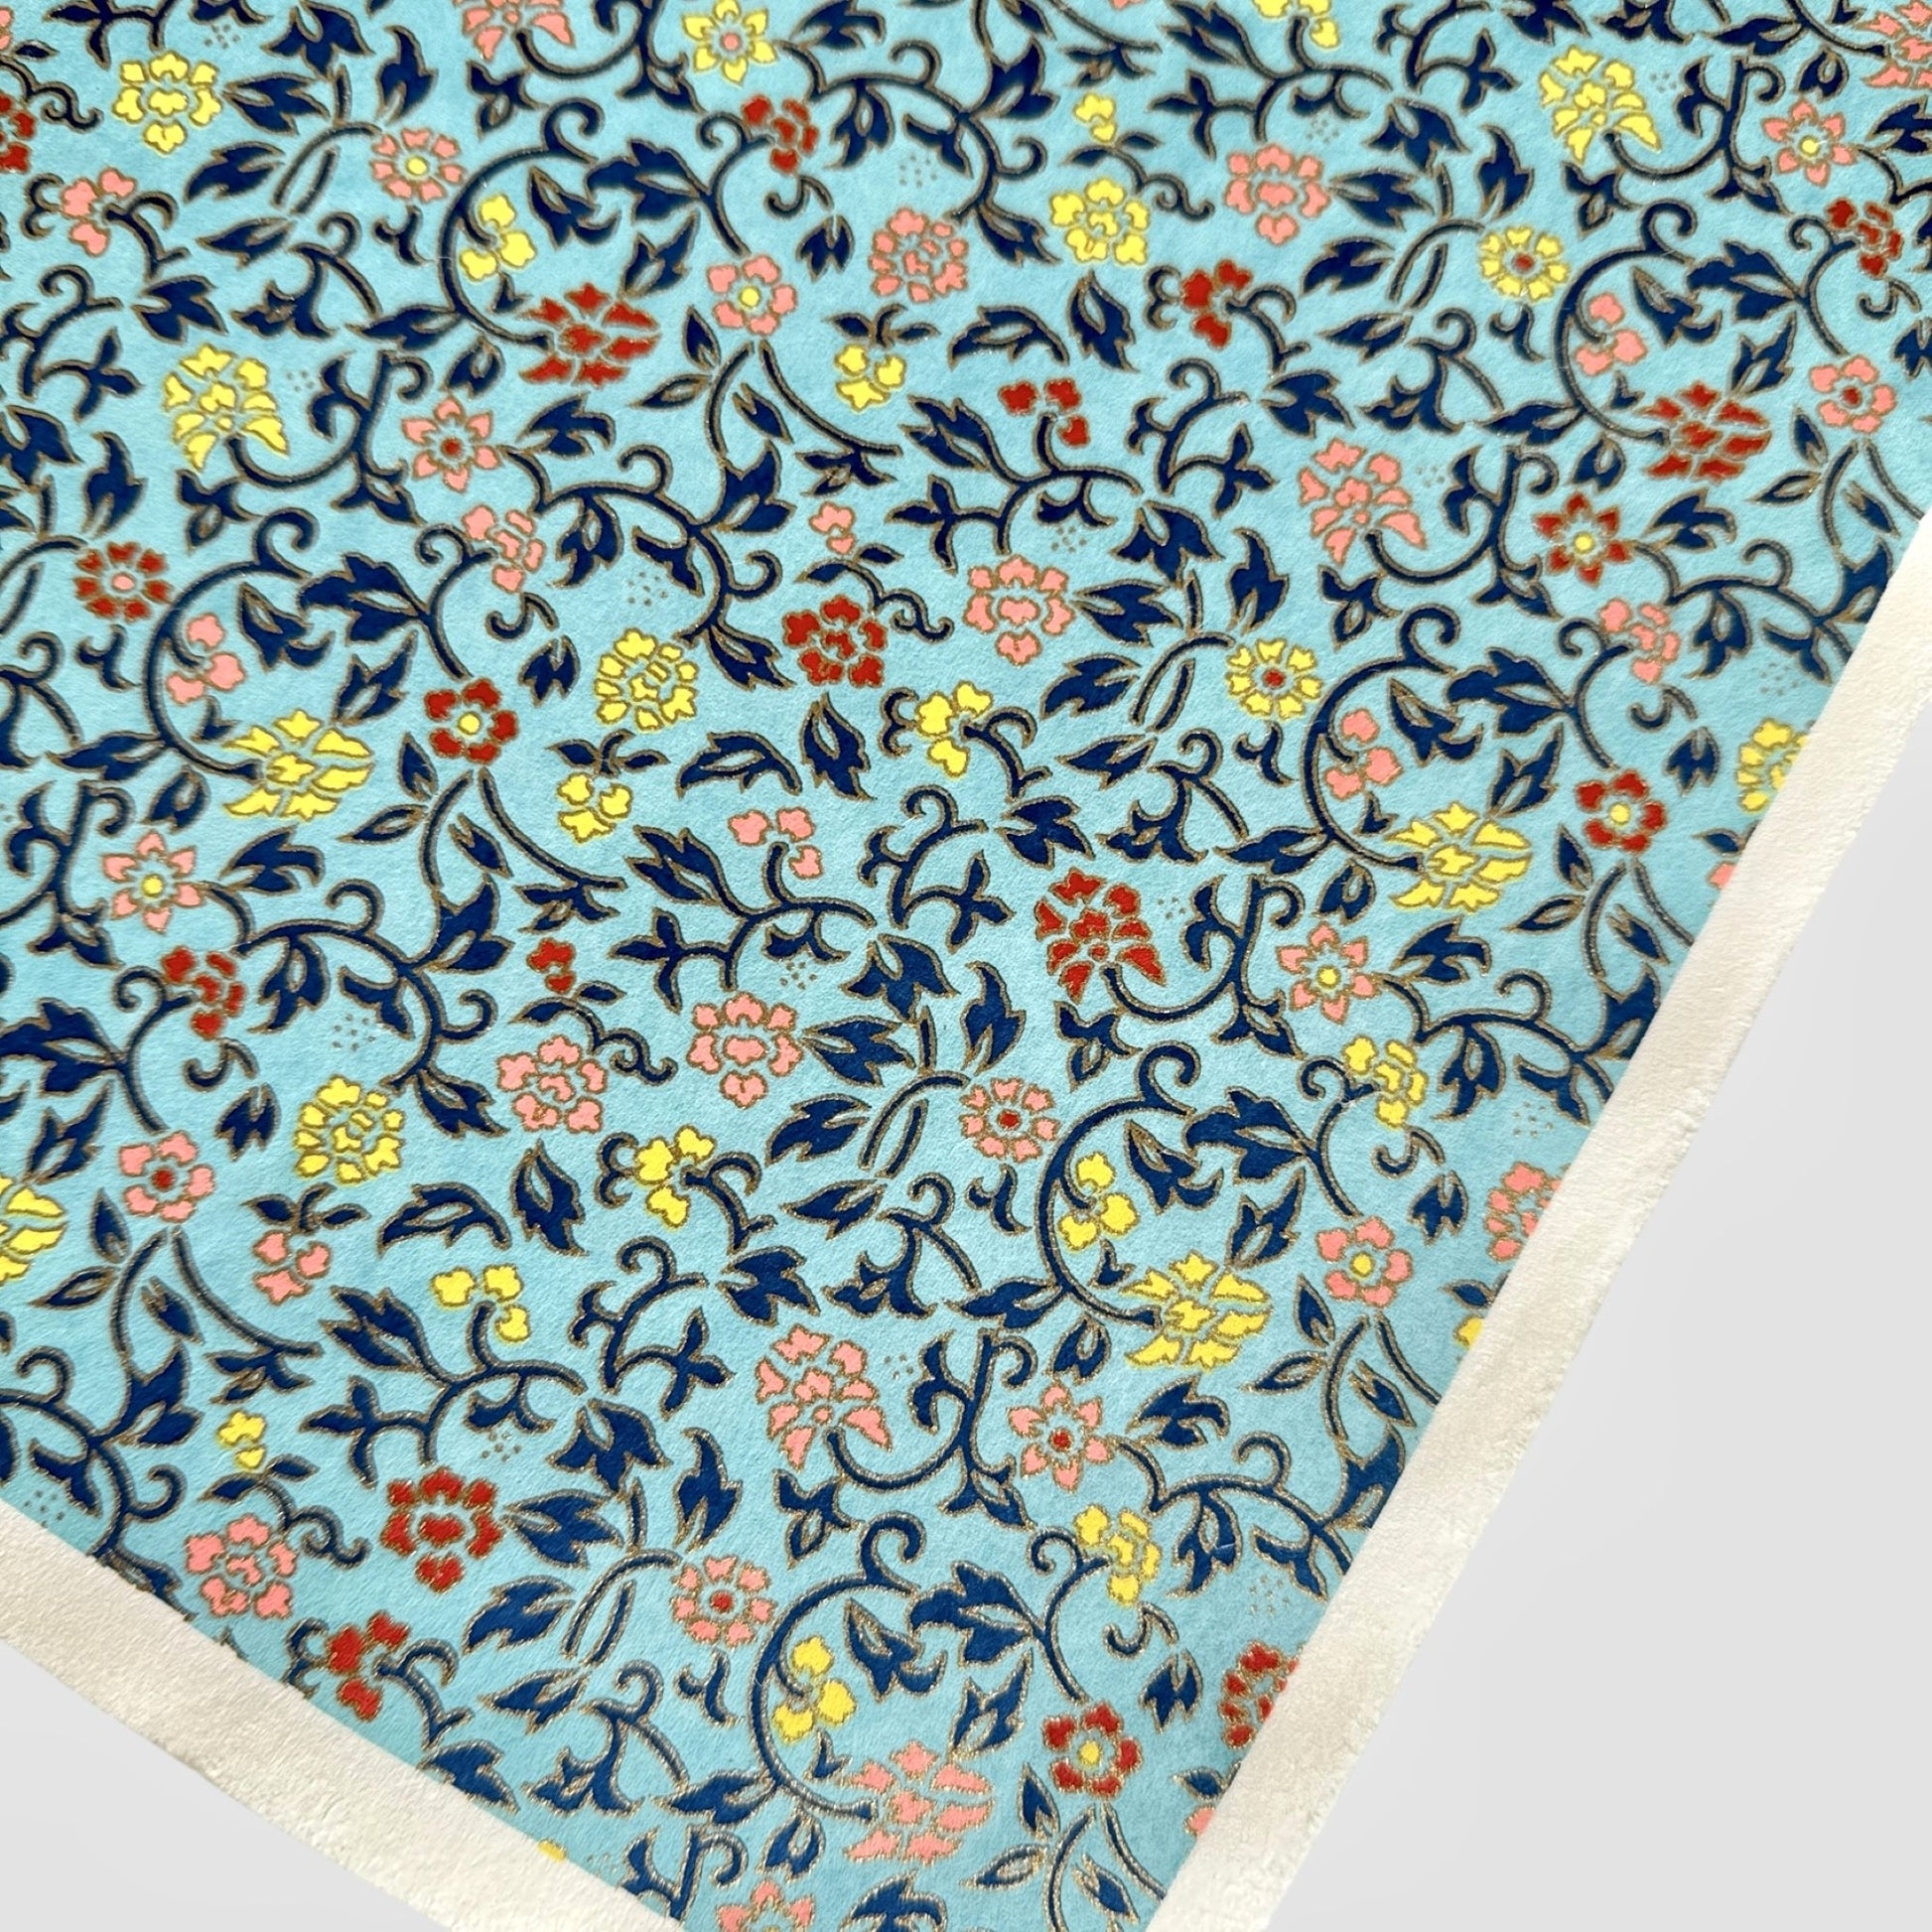 Japanese silkscreen chiyogami paper with a dainty floral pattern in navy, yellow and coral on a teal backdrop. Finished with gold metallic ink. Close up